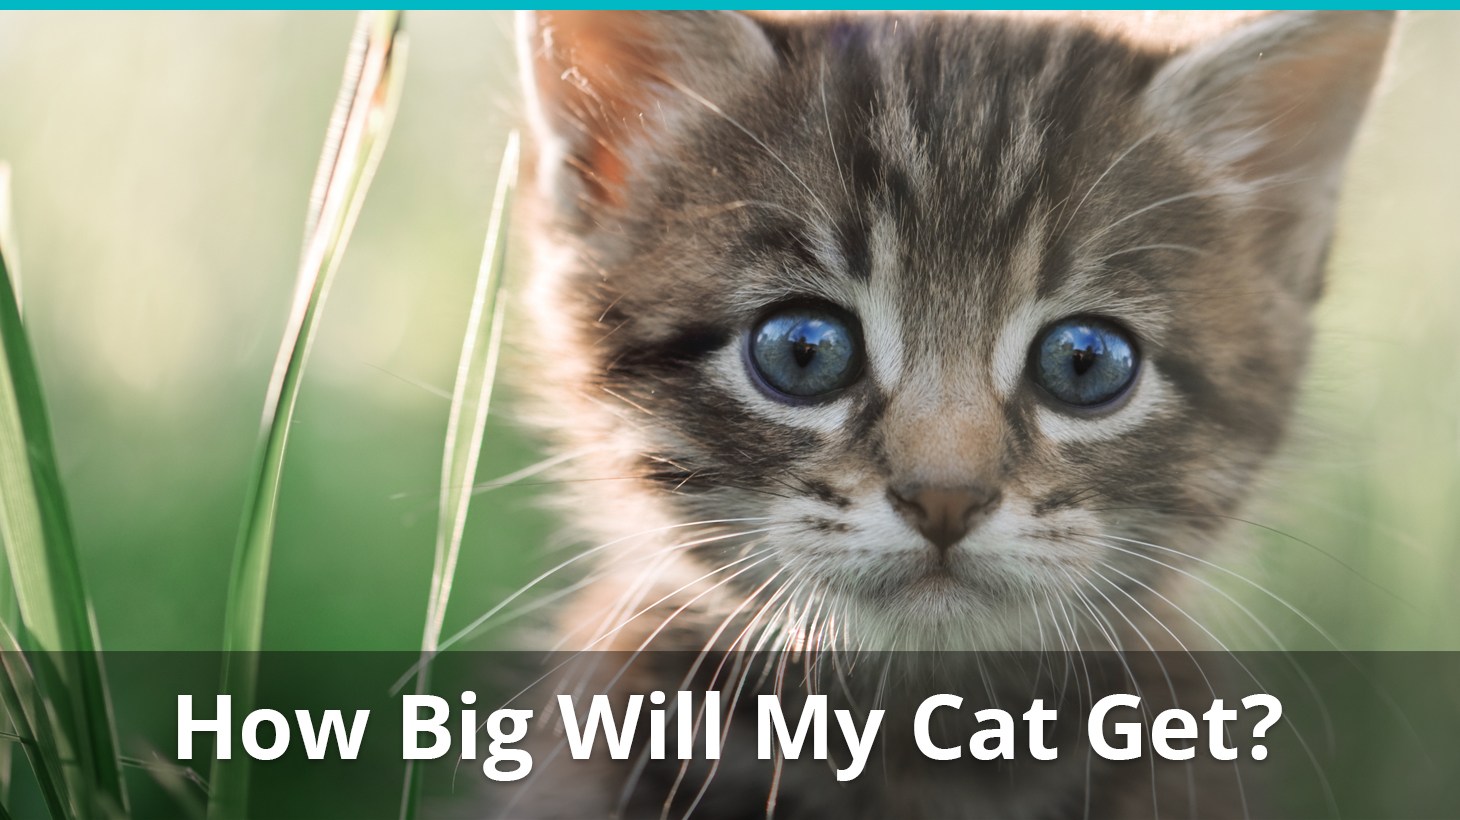 How Big Will My Kitten Get, & When Is It Fully Grown? (Plus Growth Chart)